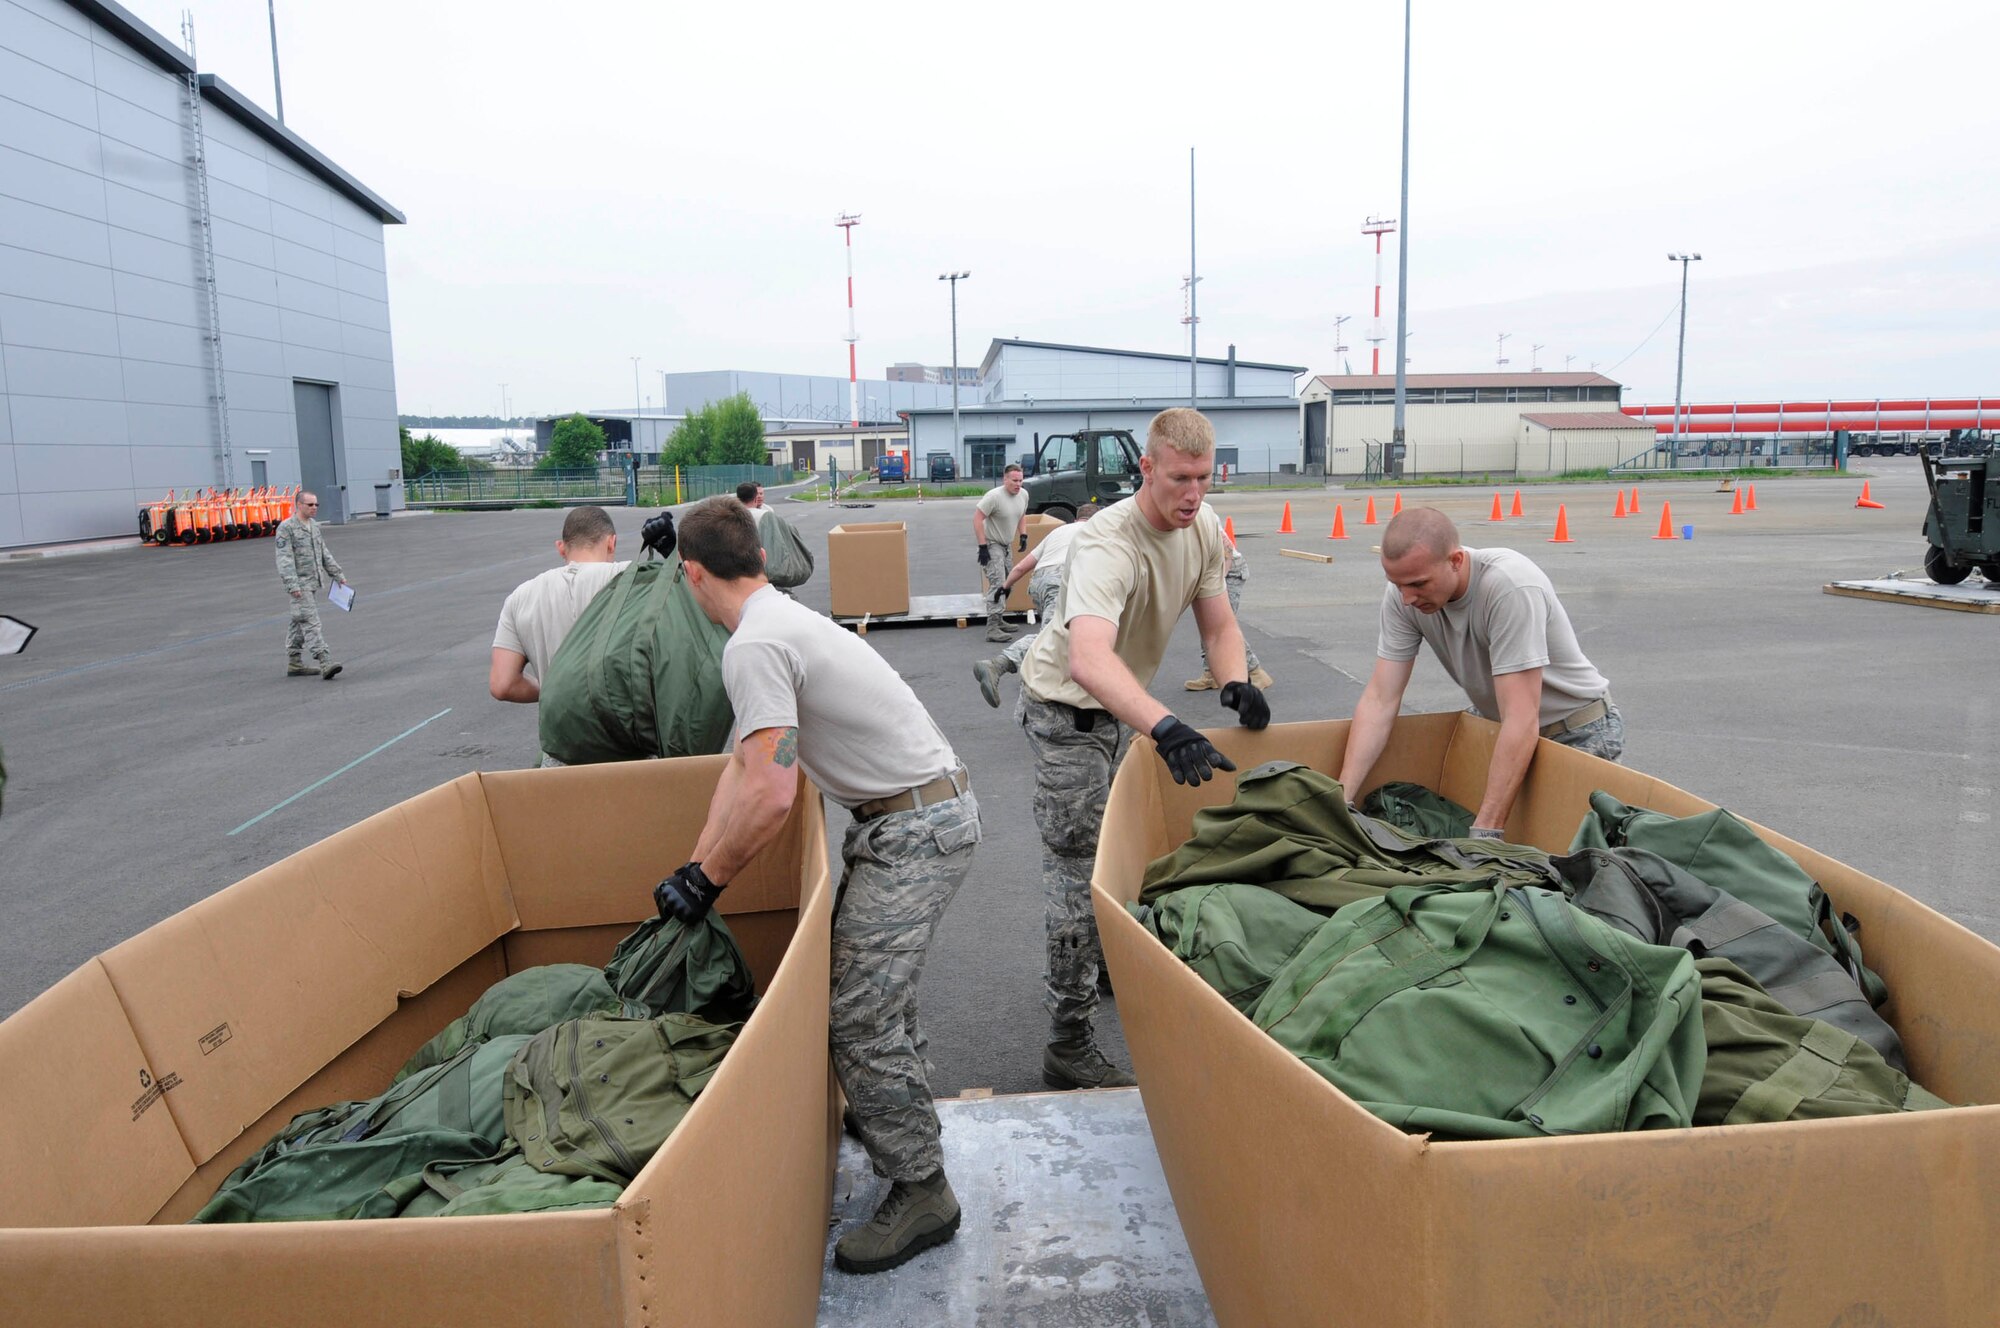 U.S. Air Force Airmen from the 435th Air Mobility Squadron and the 86th Logistics Readiness Squadron move baggage from one bin to another bin approximately 30 meters away during a Mini Rodeo Challenge, Ramstein Air Base, Germay, May 12, 2011. The purpose of the Mini Rodeo Challenge is to determine which team will be competing for points on behalf of Team Ramstein at the Air Mobility Command Airlift Rodeo in July 2011. (U.S. Air Force photo by Airman Kendra Alba)